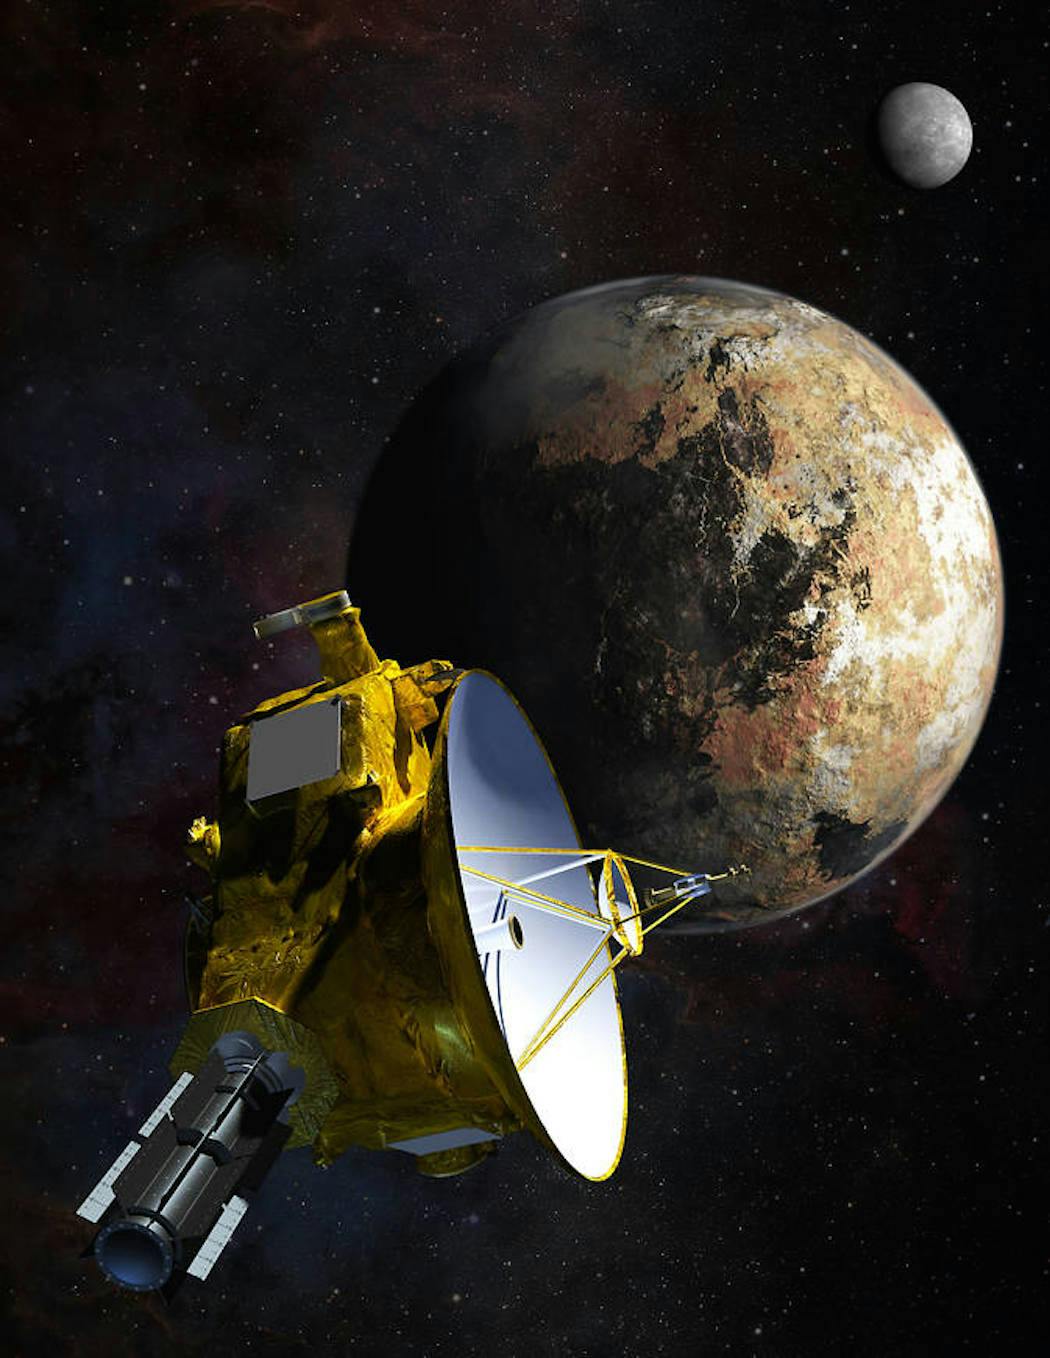 NASA caption: Artist’s concept of NASA’s New Horizons spacecraft as it passes Pluto and Pluto’s largest moon, Charon, in July 2015.